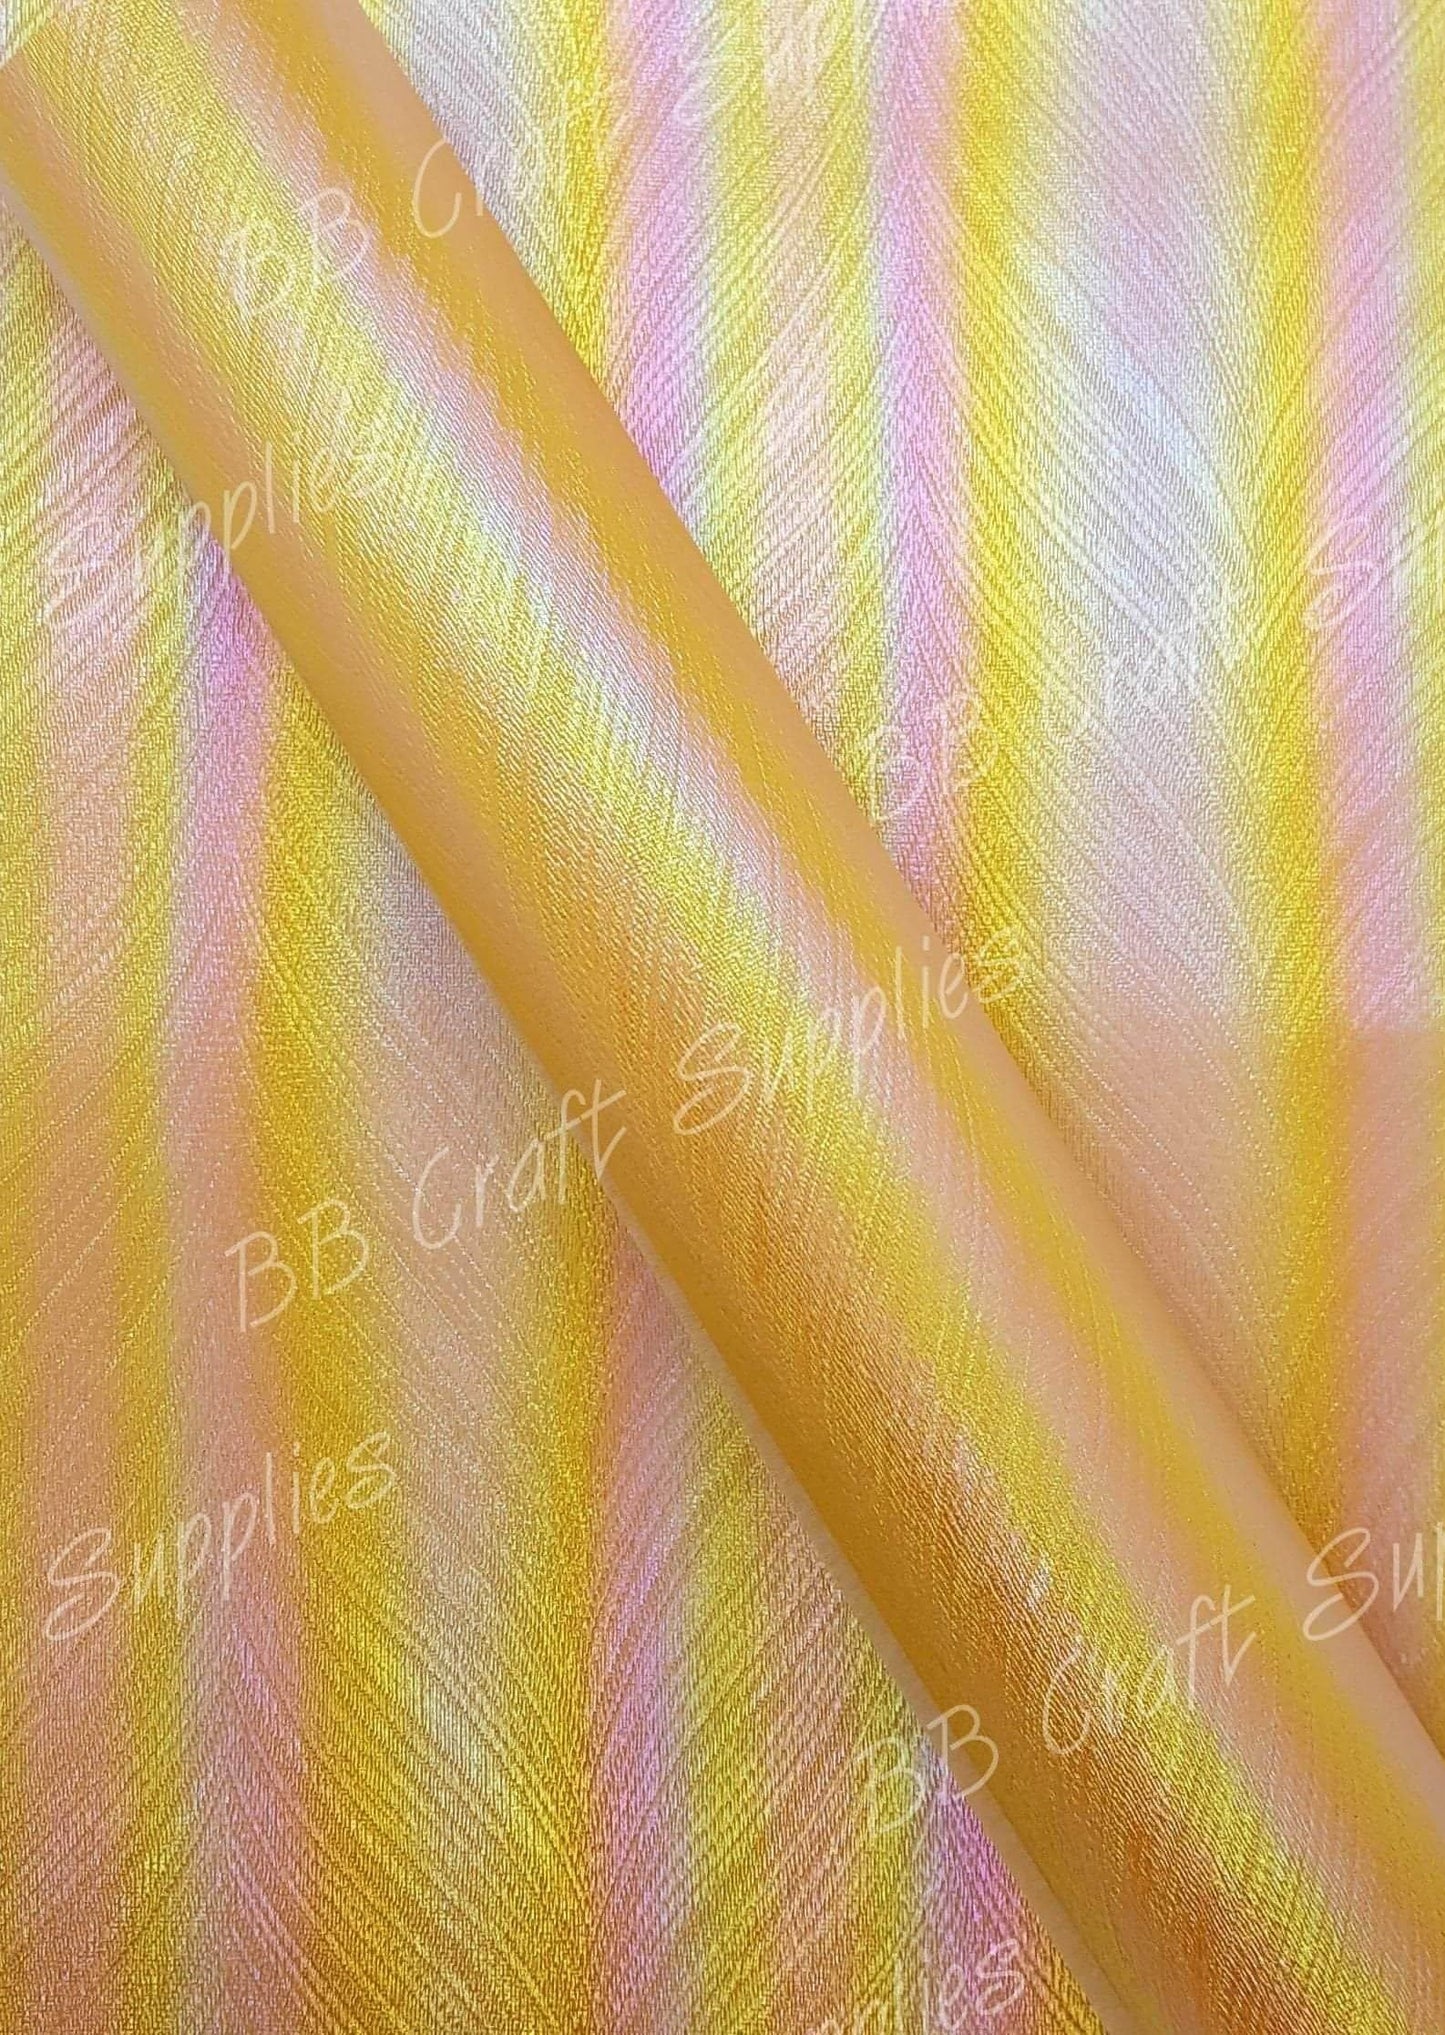 Roll - Peacock Feather Yellow - Faux, Faux Leather, peacock, Roll, Yellow - Bare Butler Faux Leather Supplies 